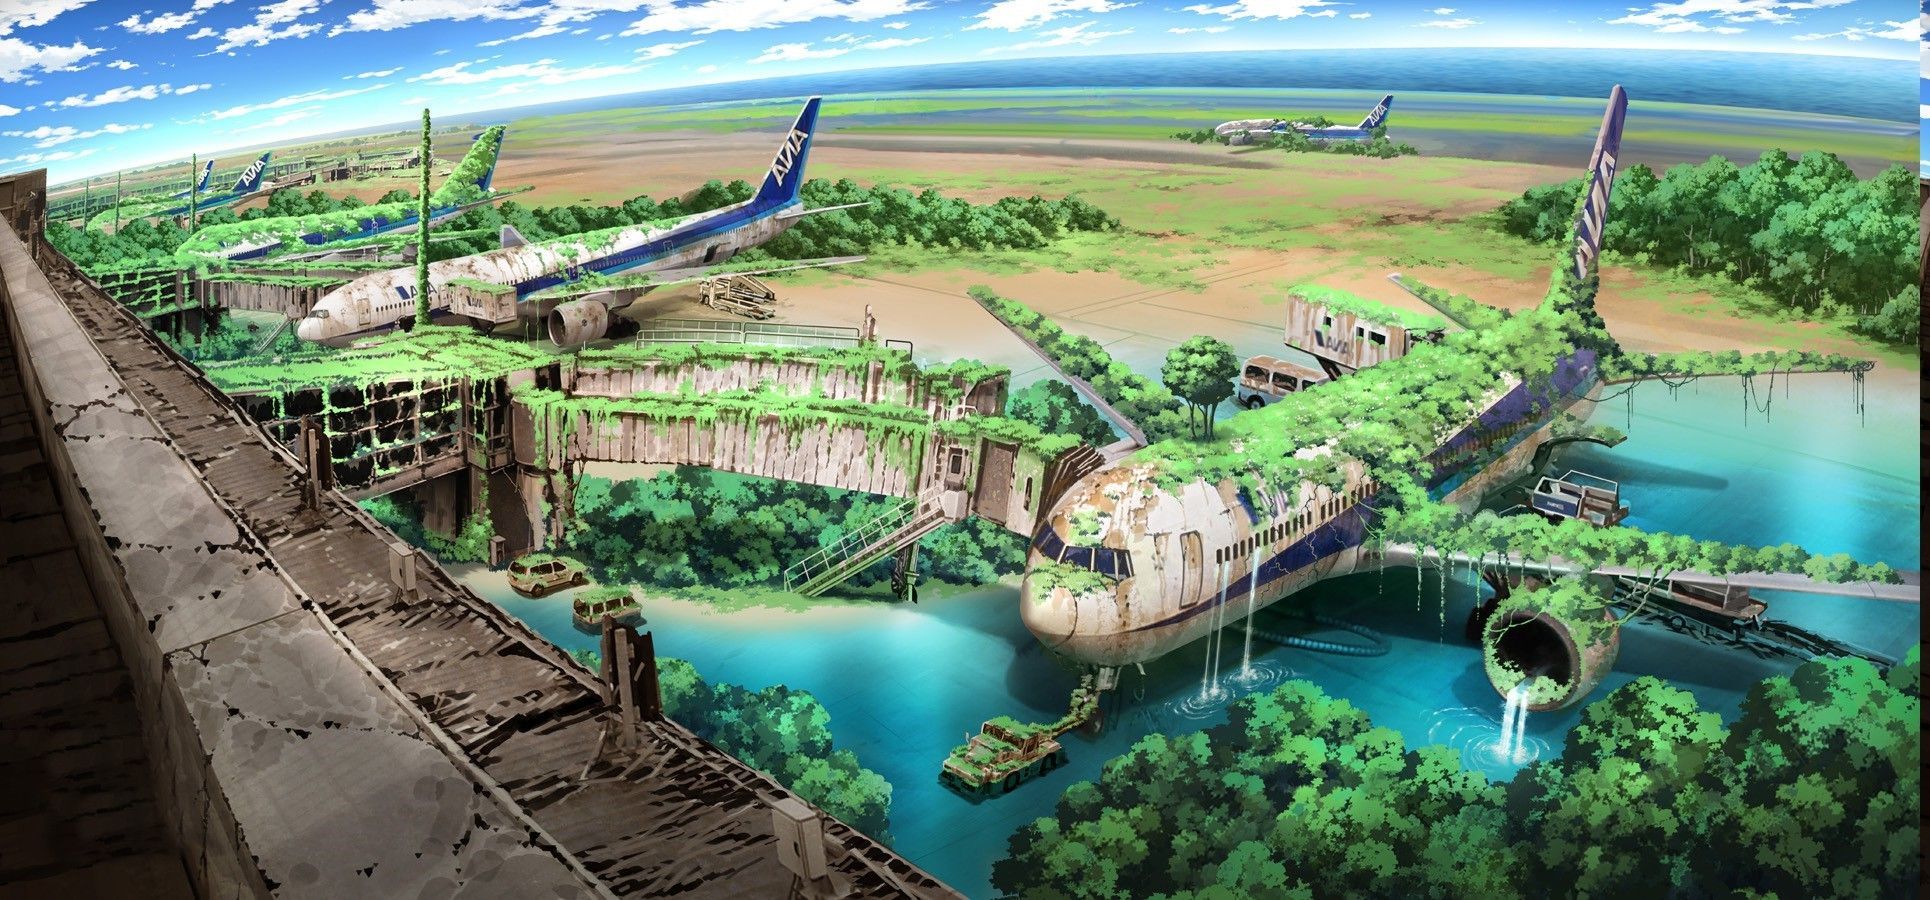 An anime landscape of an airport with abandoned planes and a beautiful river - Anime landscape